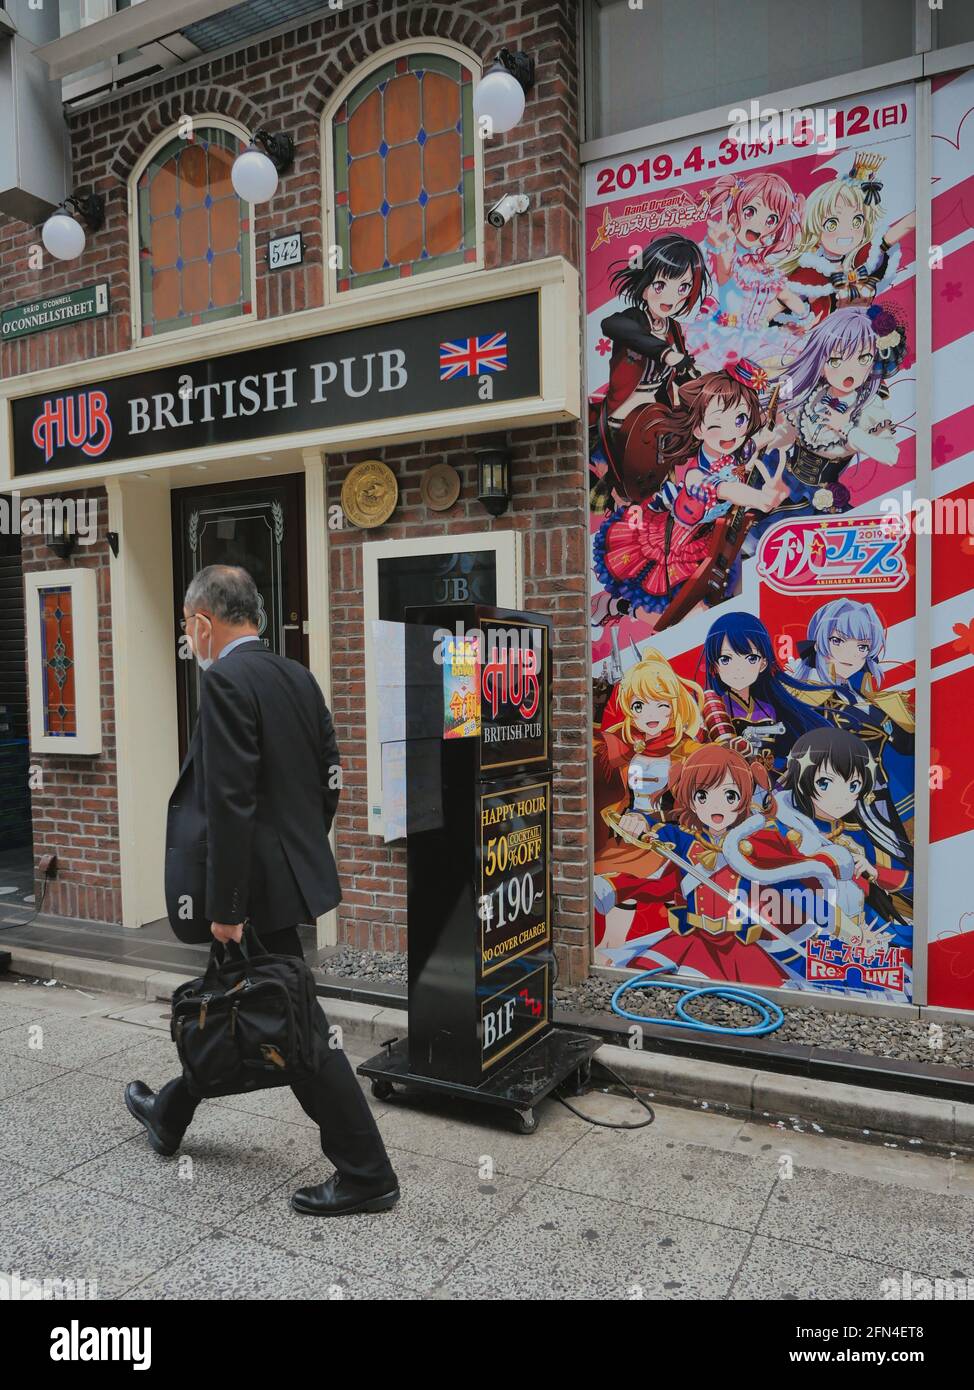 Old businessman strolls through the streets of Akihabara Electric Town. Elderly man passes in front of a fake Japanese British Pub next to a billboard Stock Photo